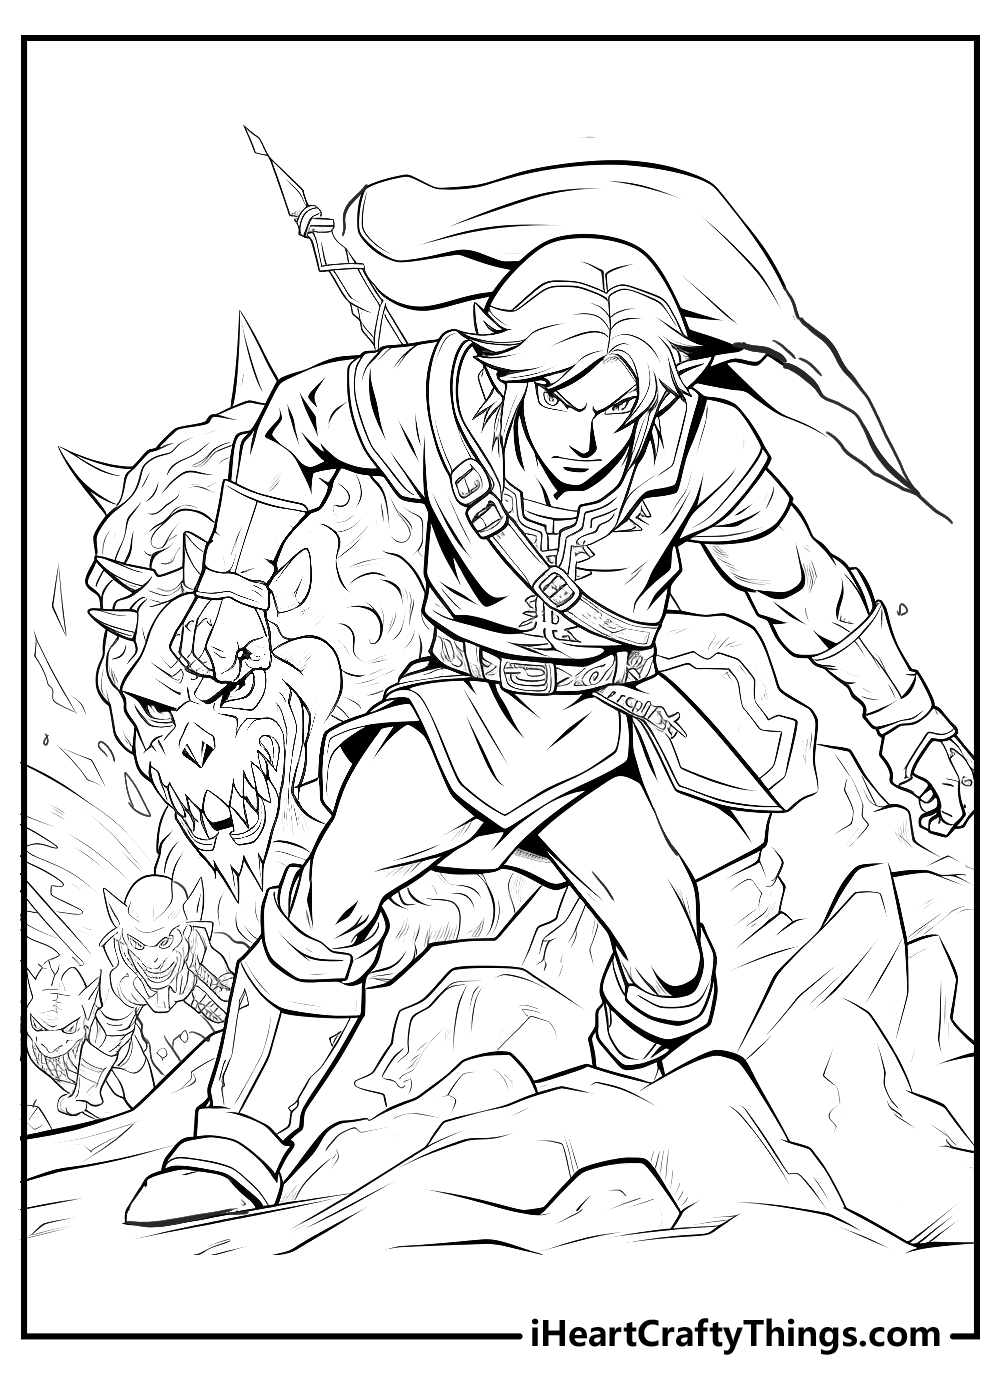 Printable zelda coloring pages updated